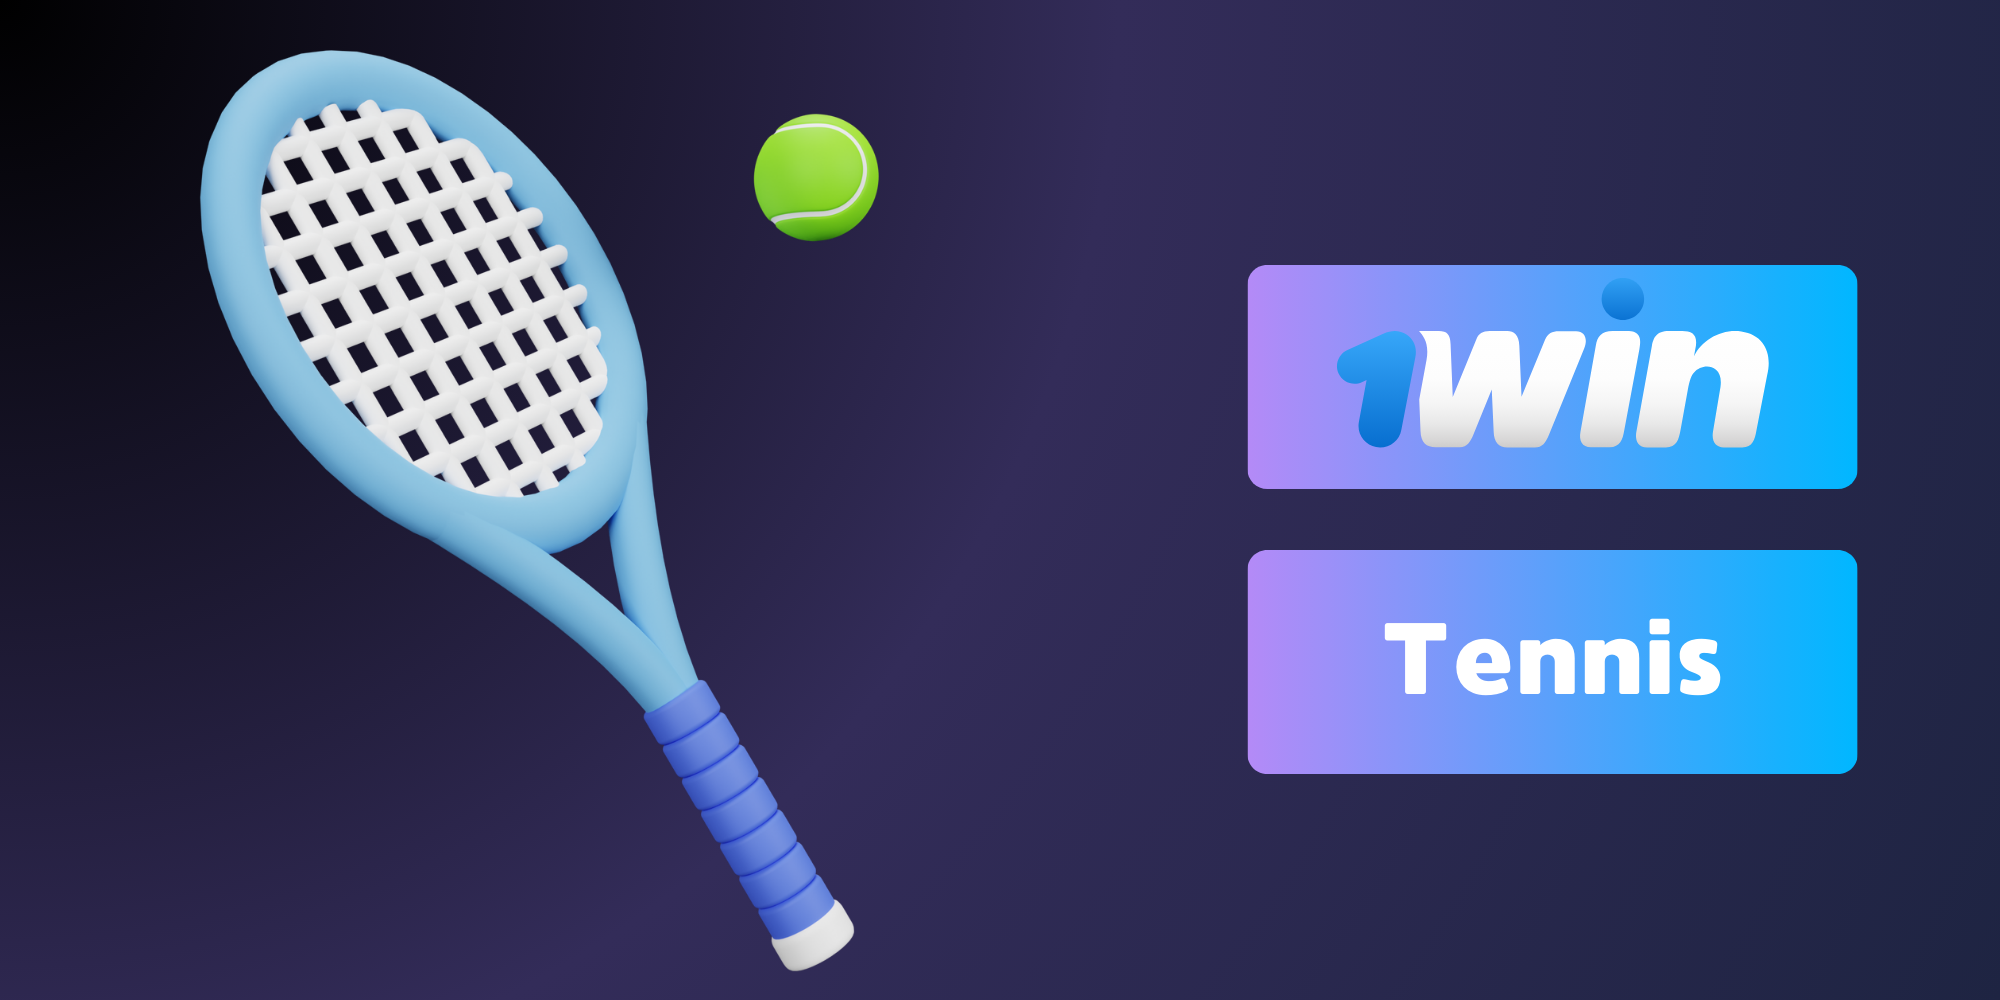 1win covers various tennis events that Indian players can bet on